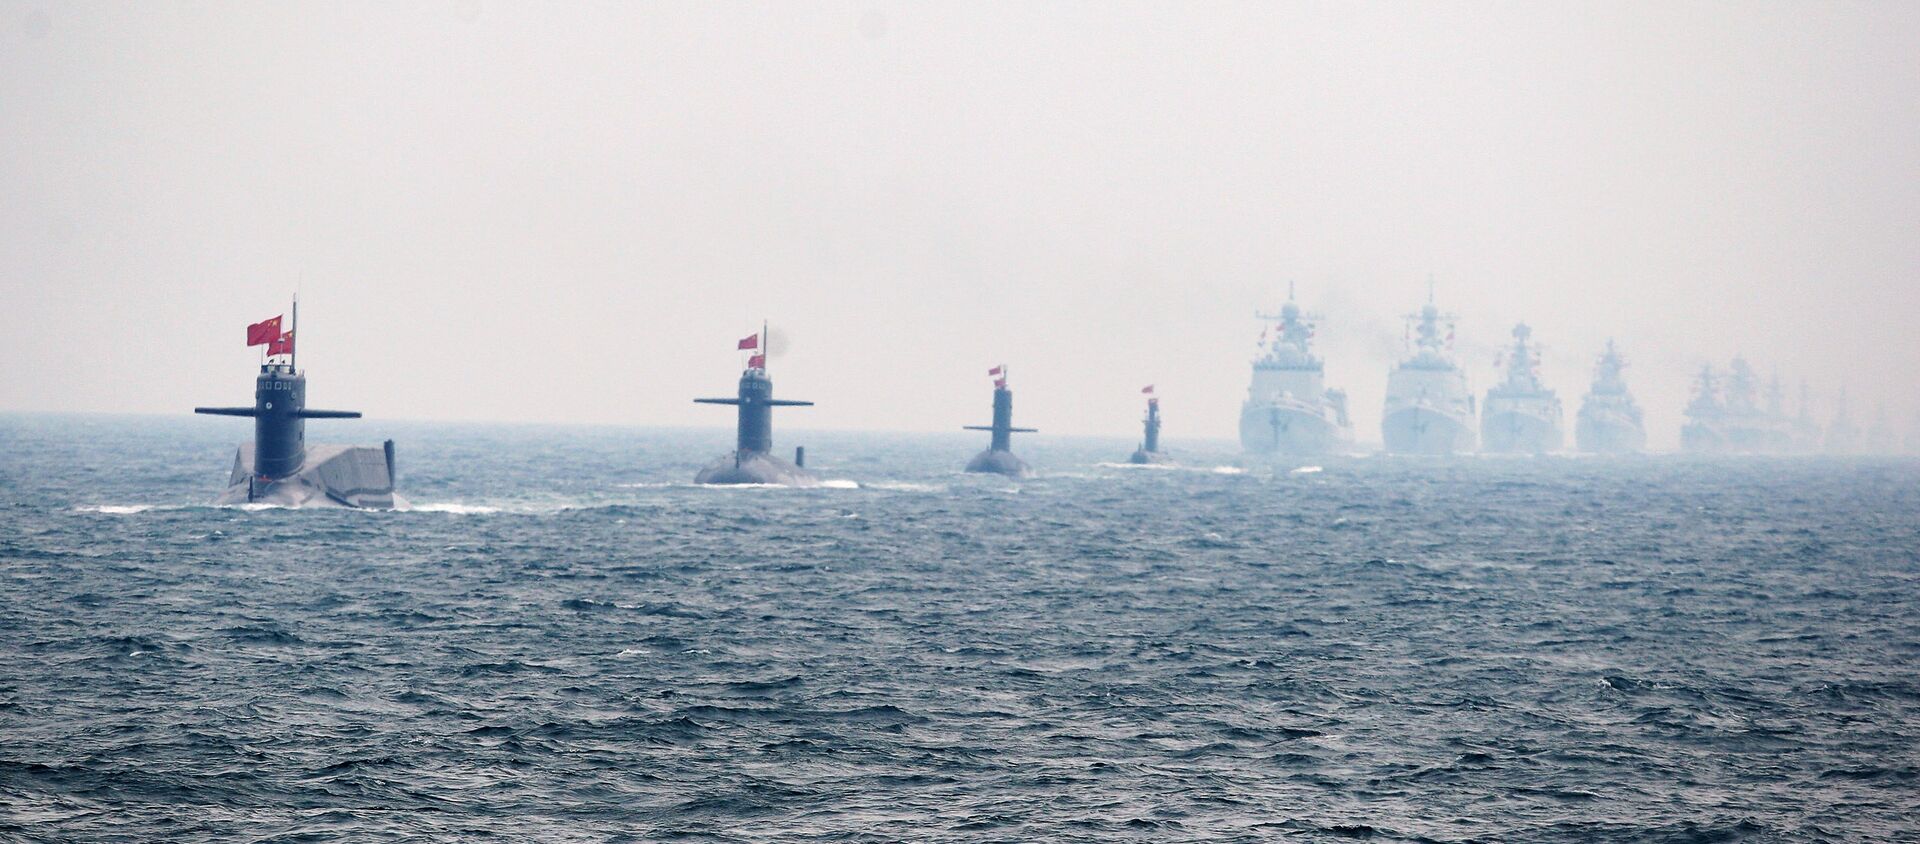 Four Chinese Navy submarines (L) and warships attend an international fleet review to celebrate the 60th anniversary of the founding of the People's Liberation Army Navy on April 23, 2009 off Qingdao in Shandong Province - Sputnik International, 1920, 11.03.2021